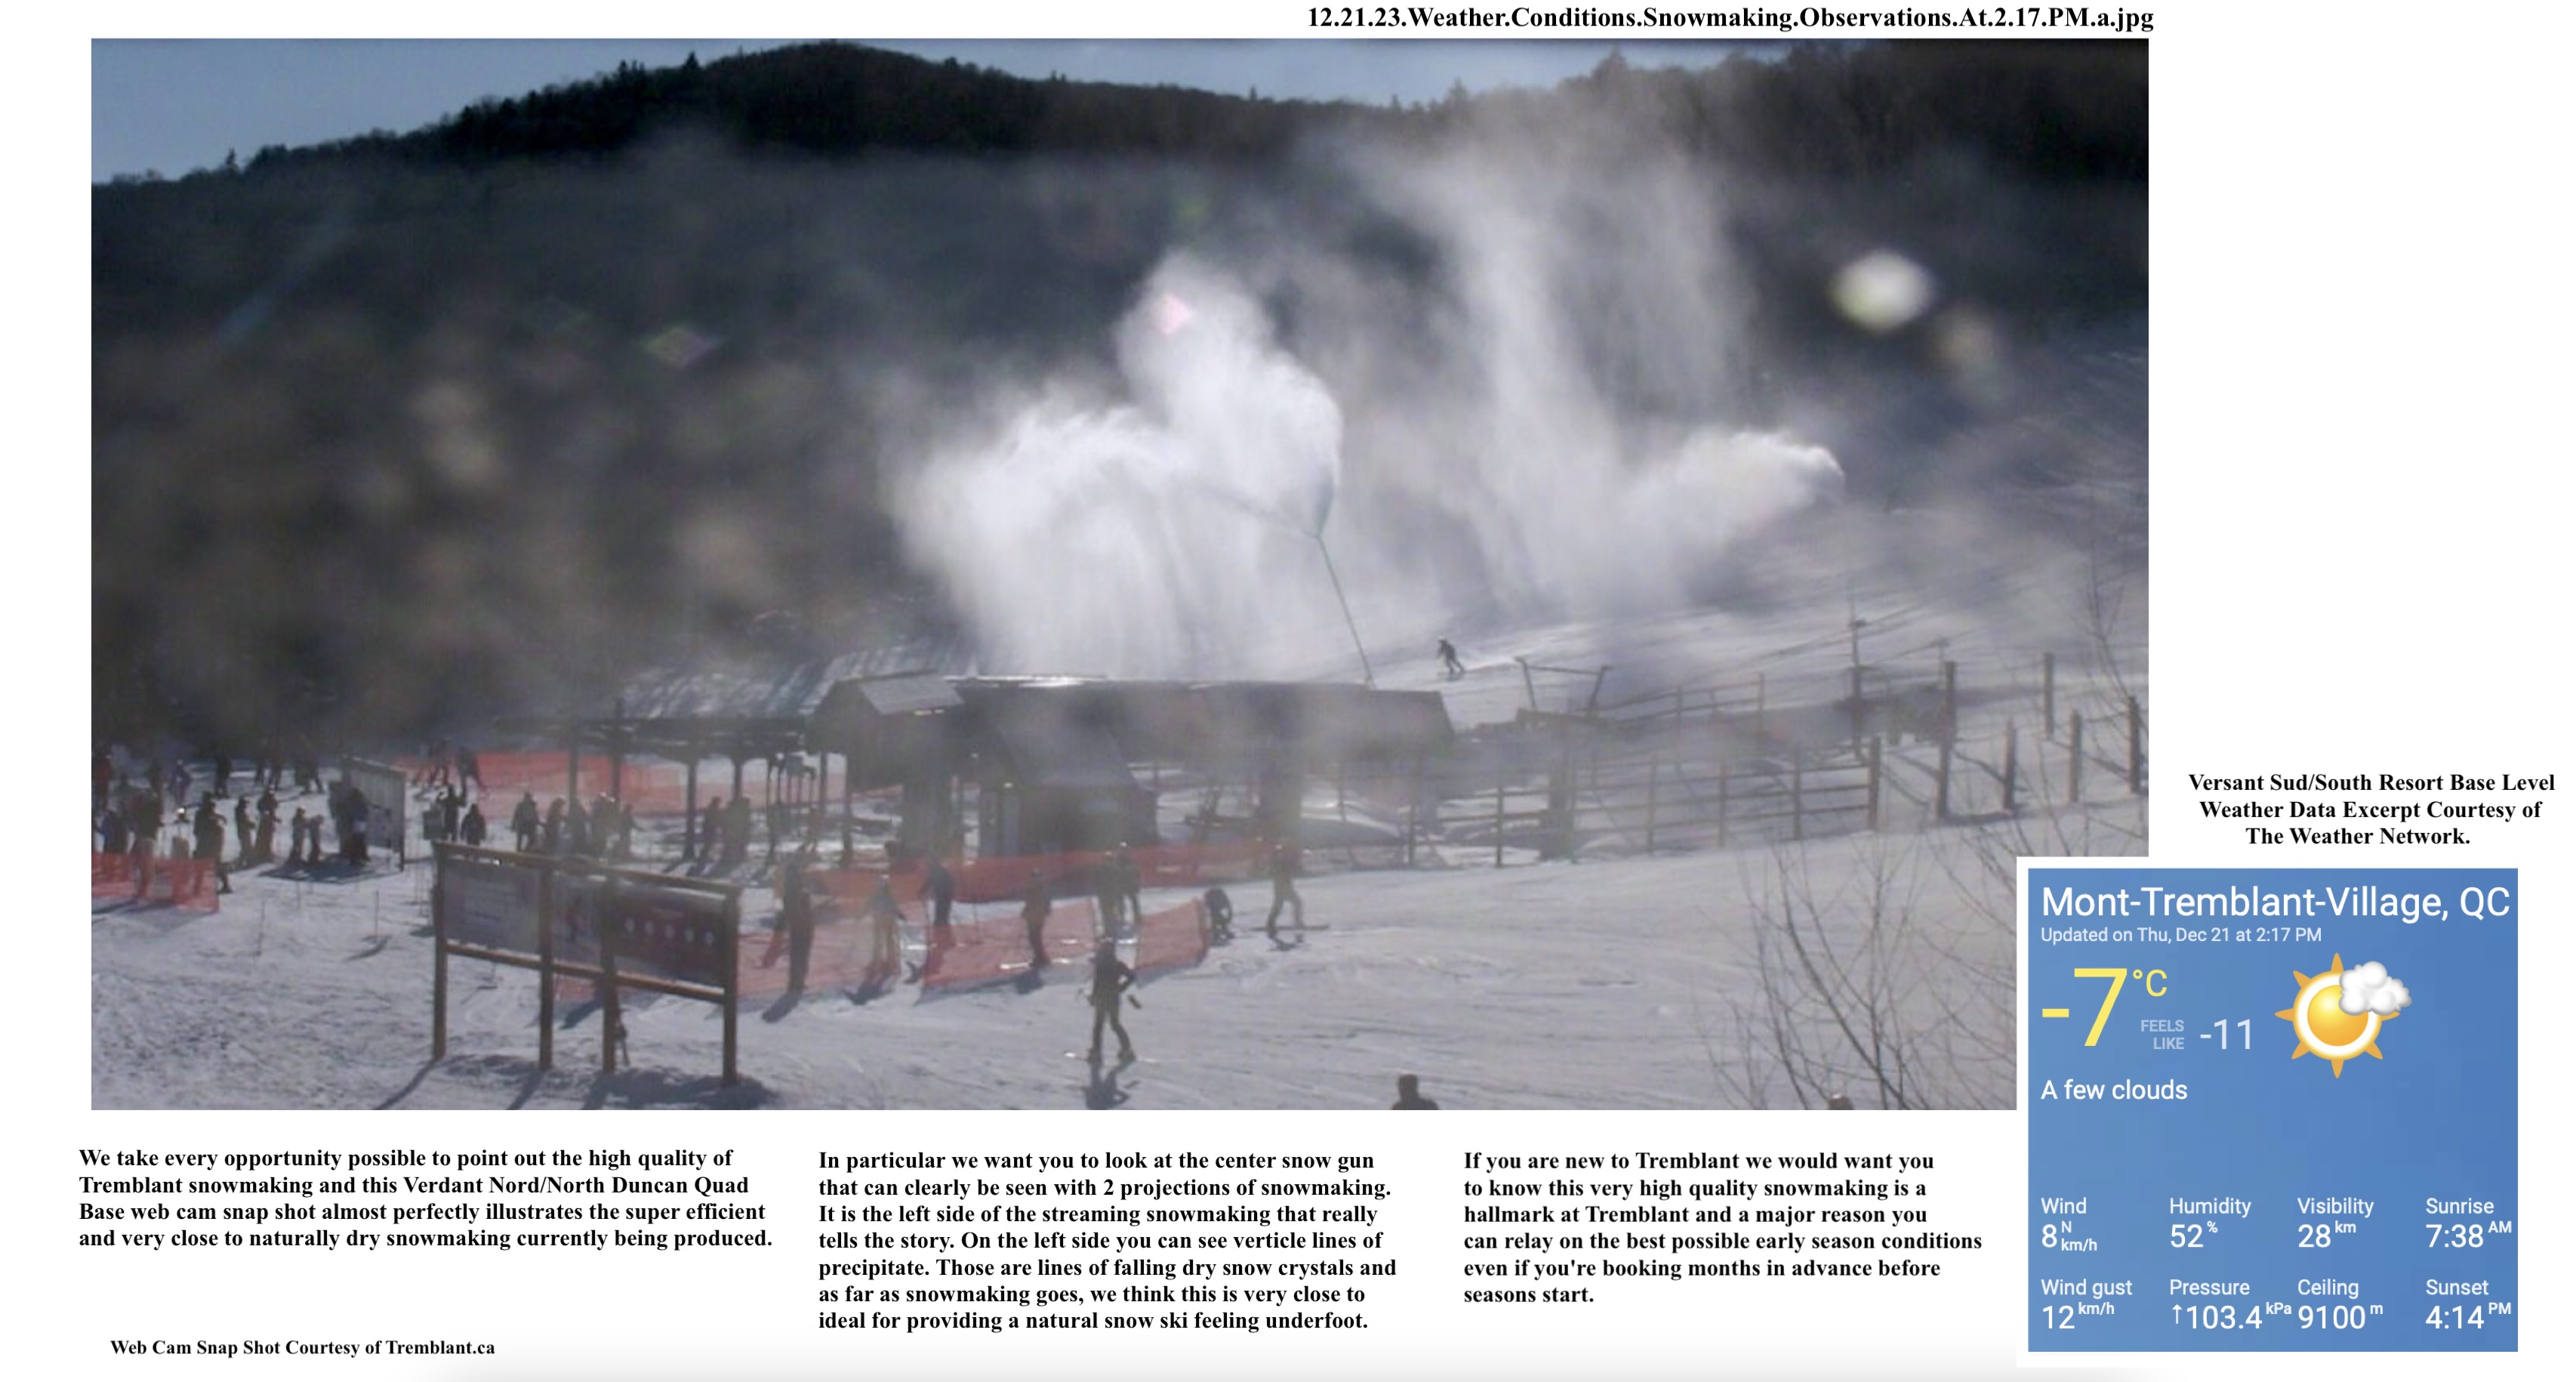 12.21.23.Weather.Conditions.Snowmaking.Observations.At.2.17.PM.a.jpg